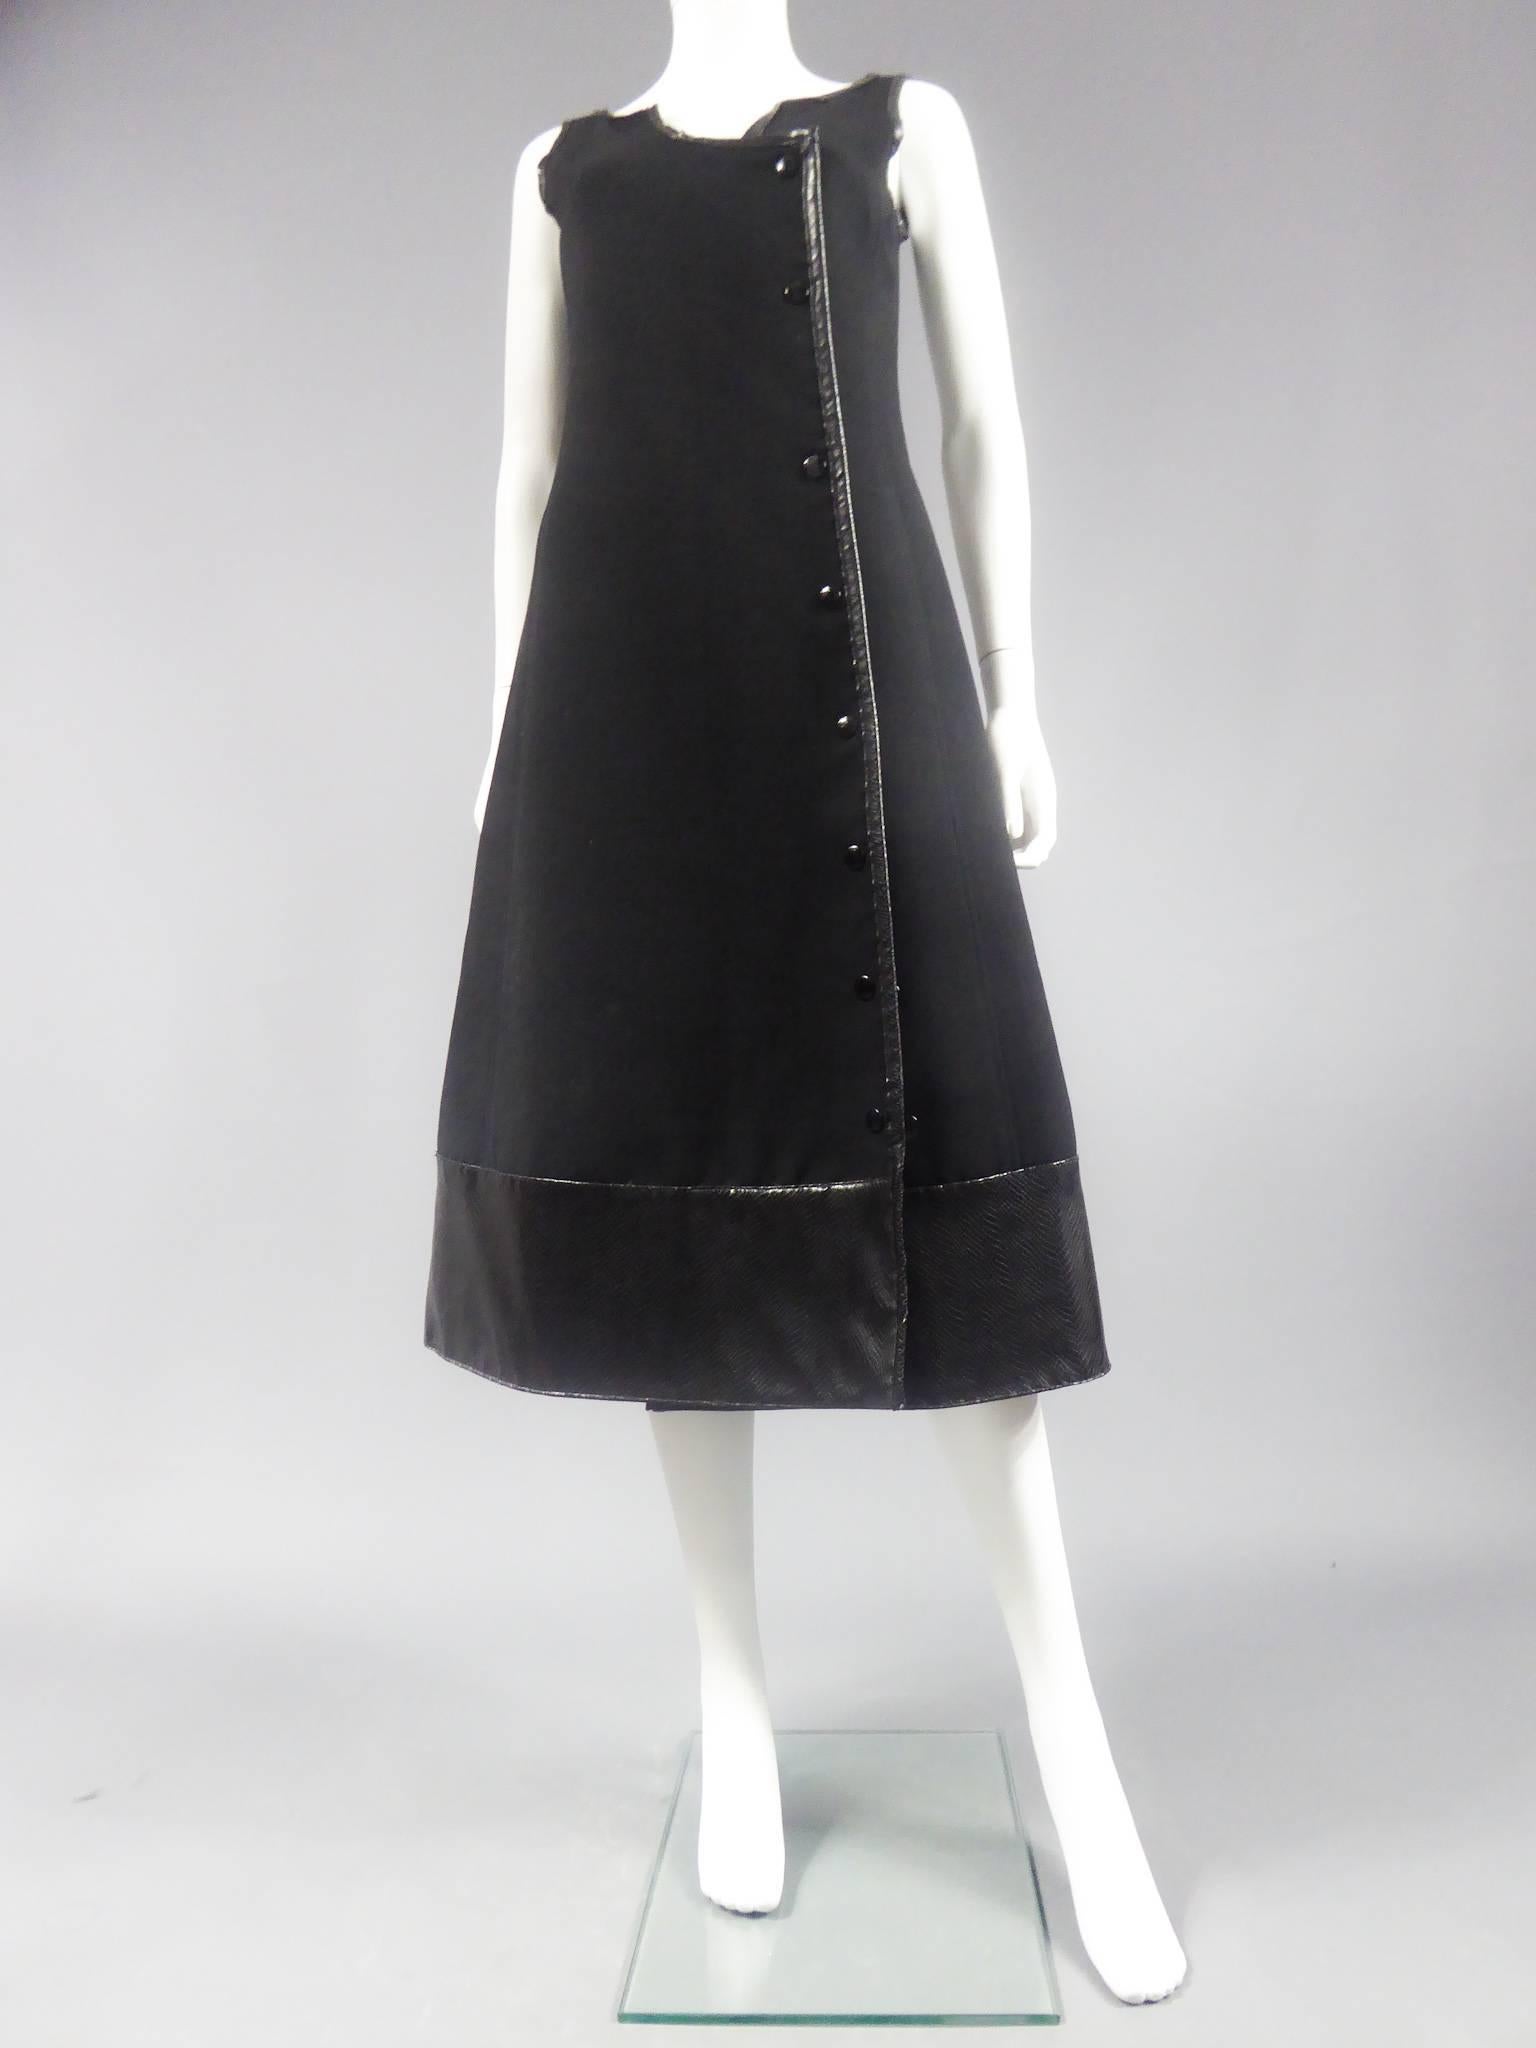 Circa 1970

France

Number 55540 Haute Couture wrap dress in thick black jersey with stitching and piping. Attaches by black snaps on the front, three are doubled to create the flare of the bottom of the skirt. Black skai band worked snake way and